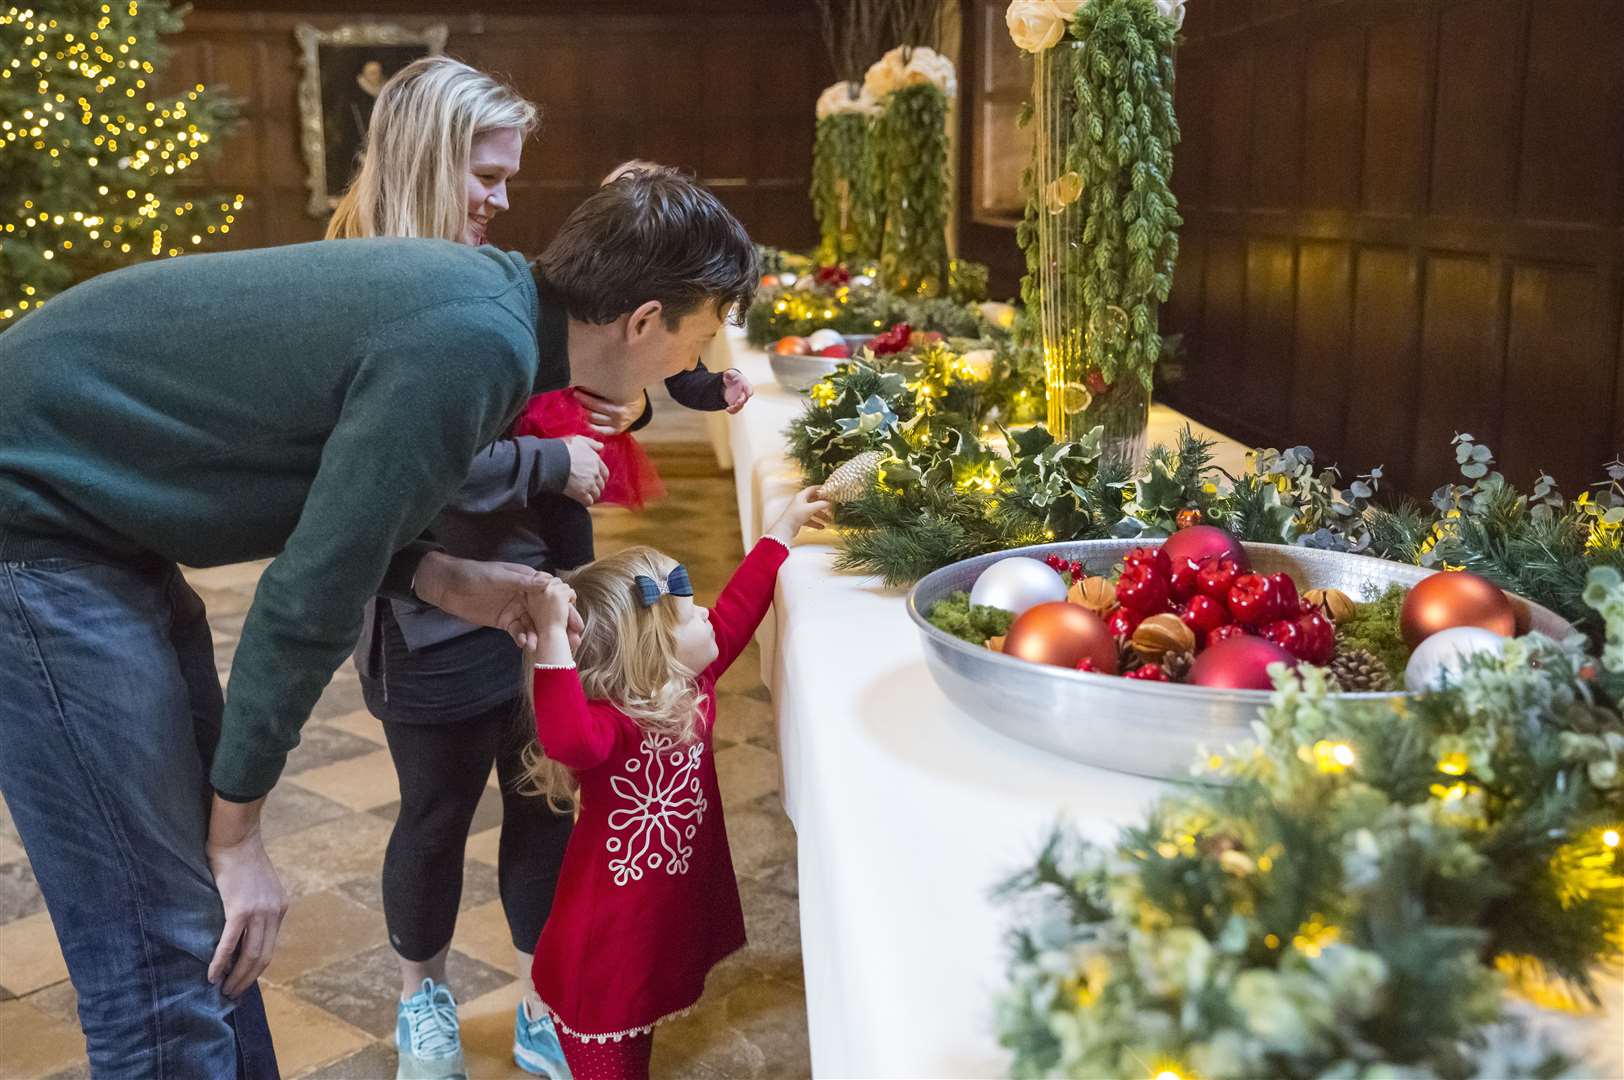 Visitors admiring the festive Christmas decorations at Knole Picture: National Trust/James Dobson